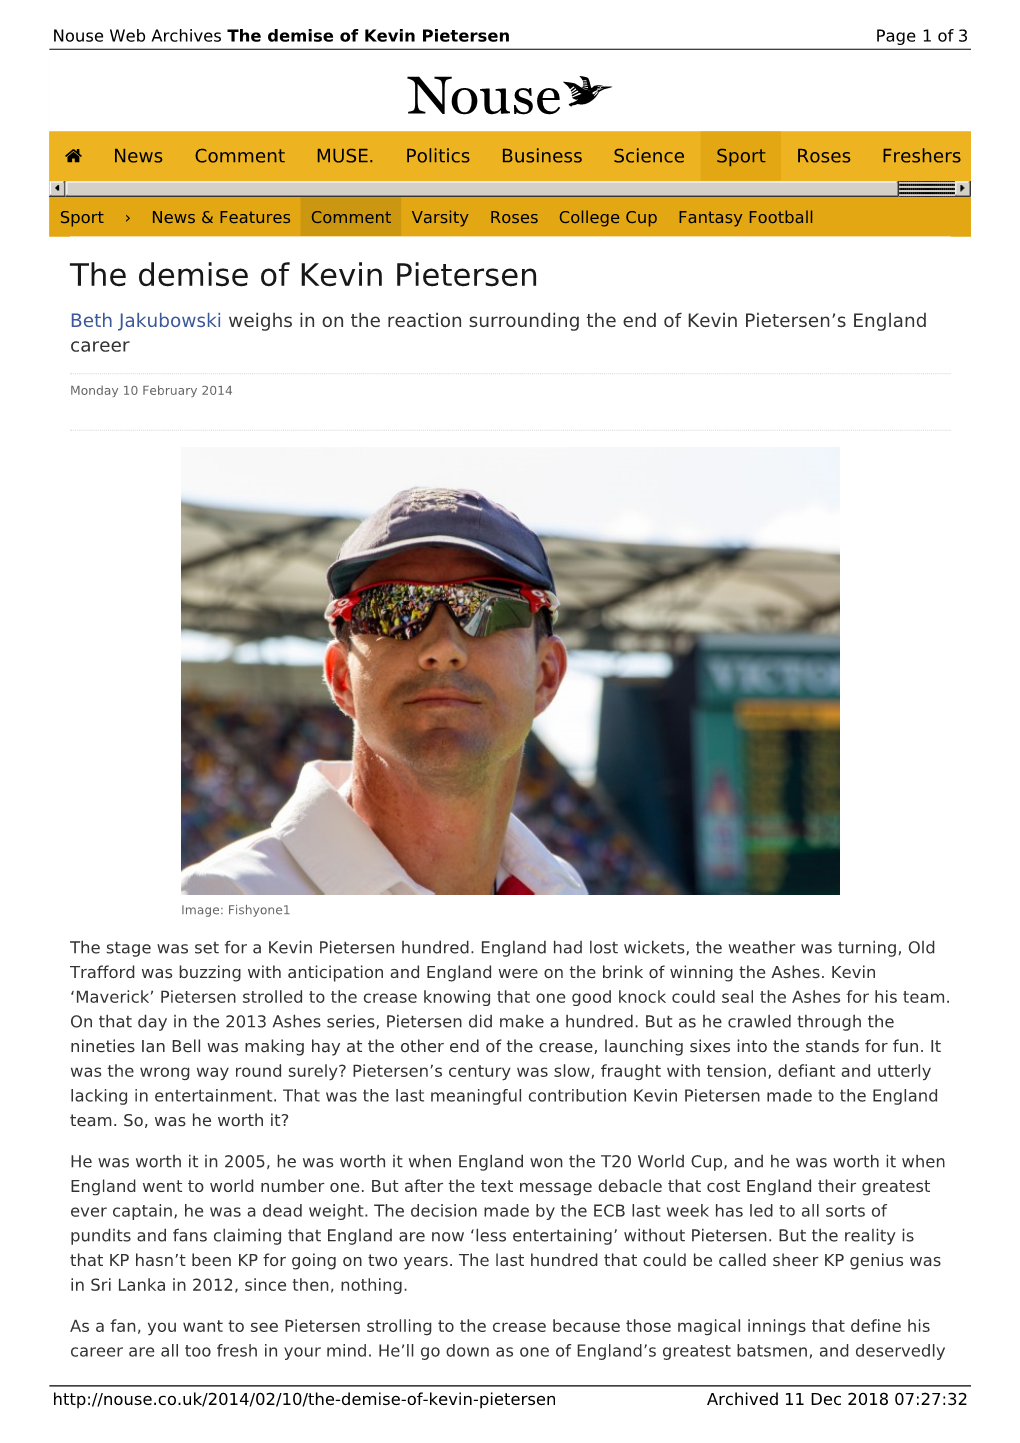 The Demise of Kevin Pietersen | Nouse